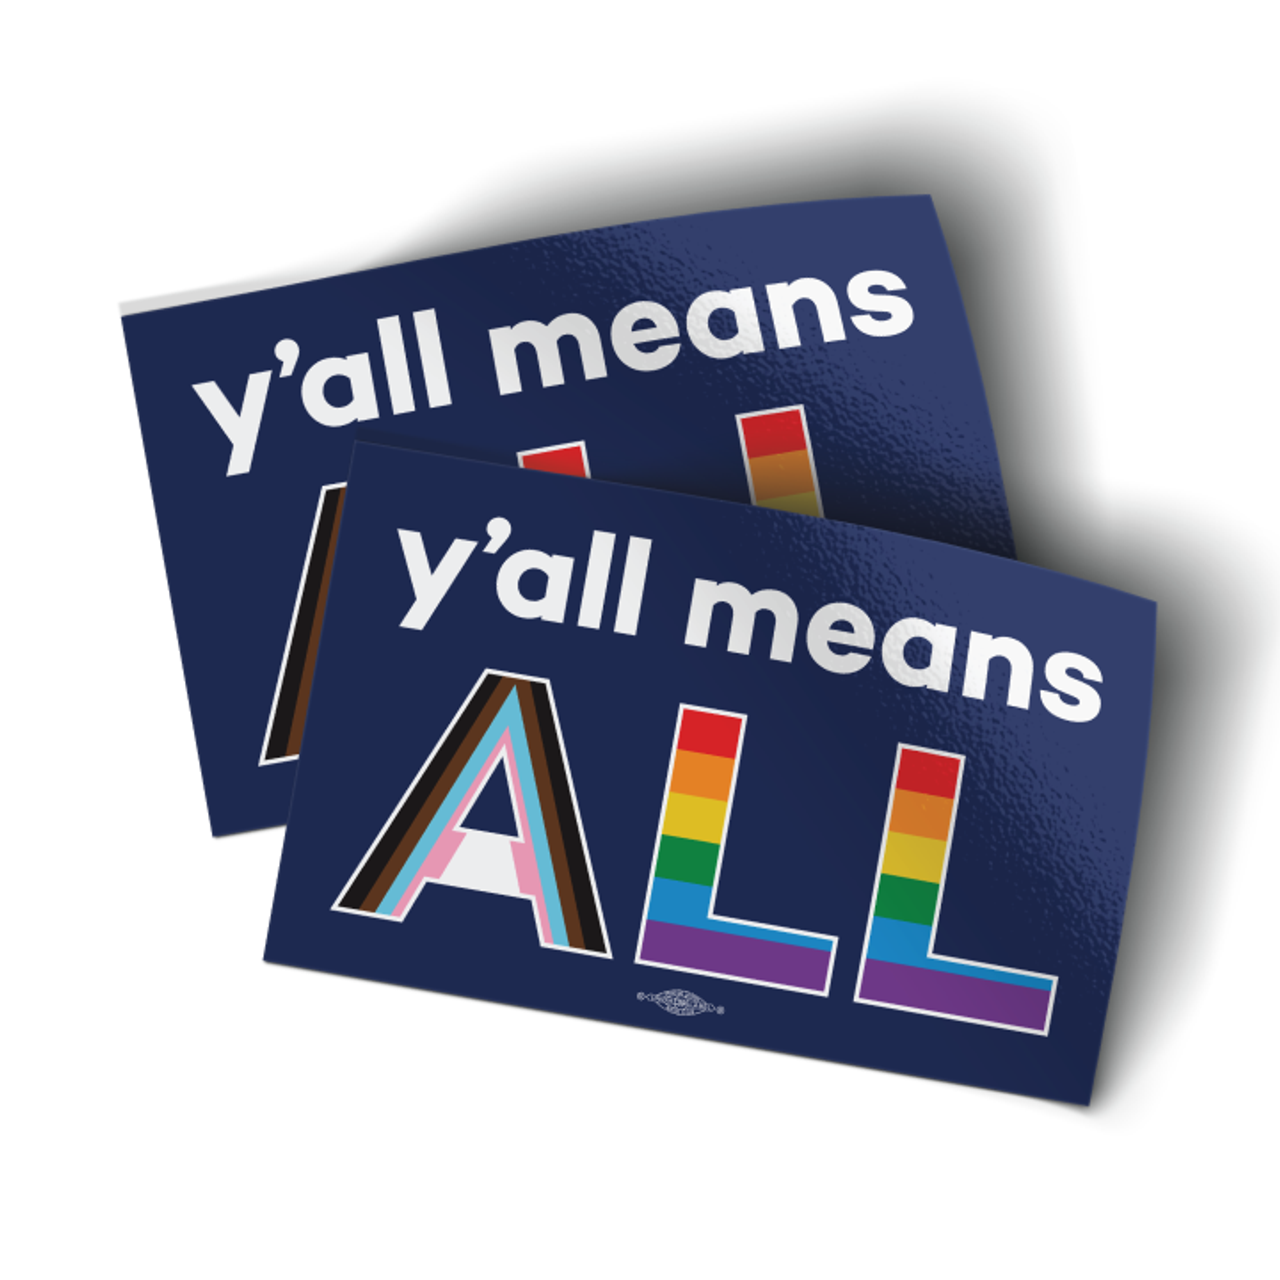 Y'all Means All - Progressive (4.75 x 3 Vinyl Sticker -- Pack of Two!) -  Texas Democratic Party Webstore